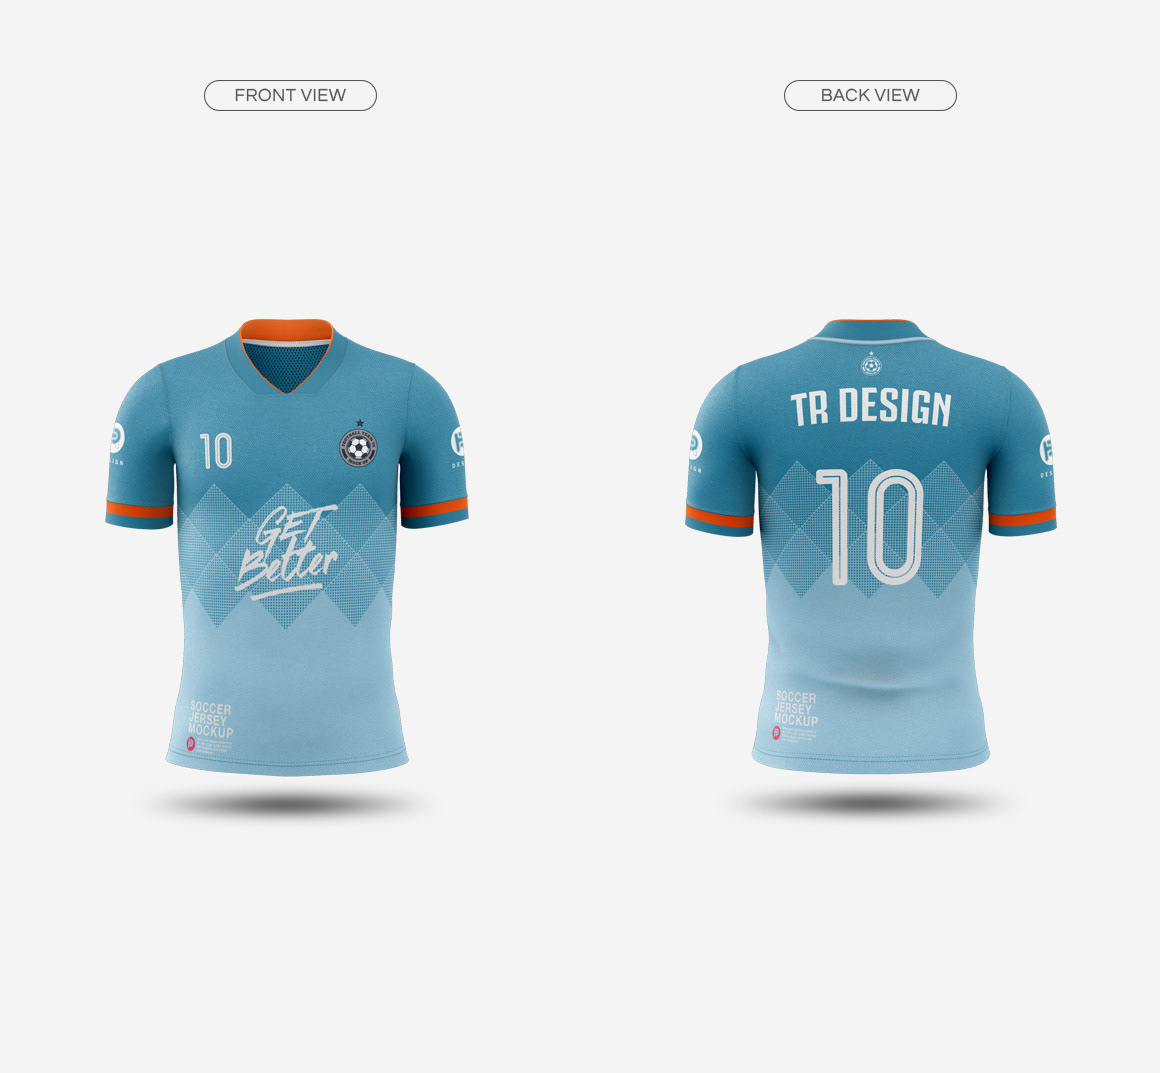 Download 36+ Mockup Jersey 2019 PSD - Free PSD Mockups Smart Object and Templates to create Magazines ...